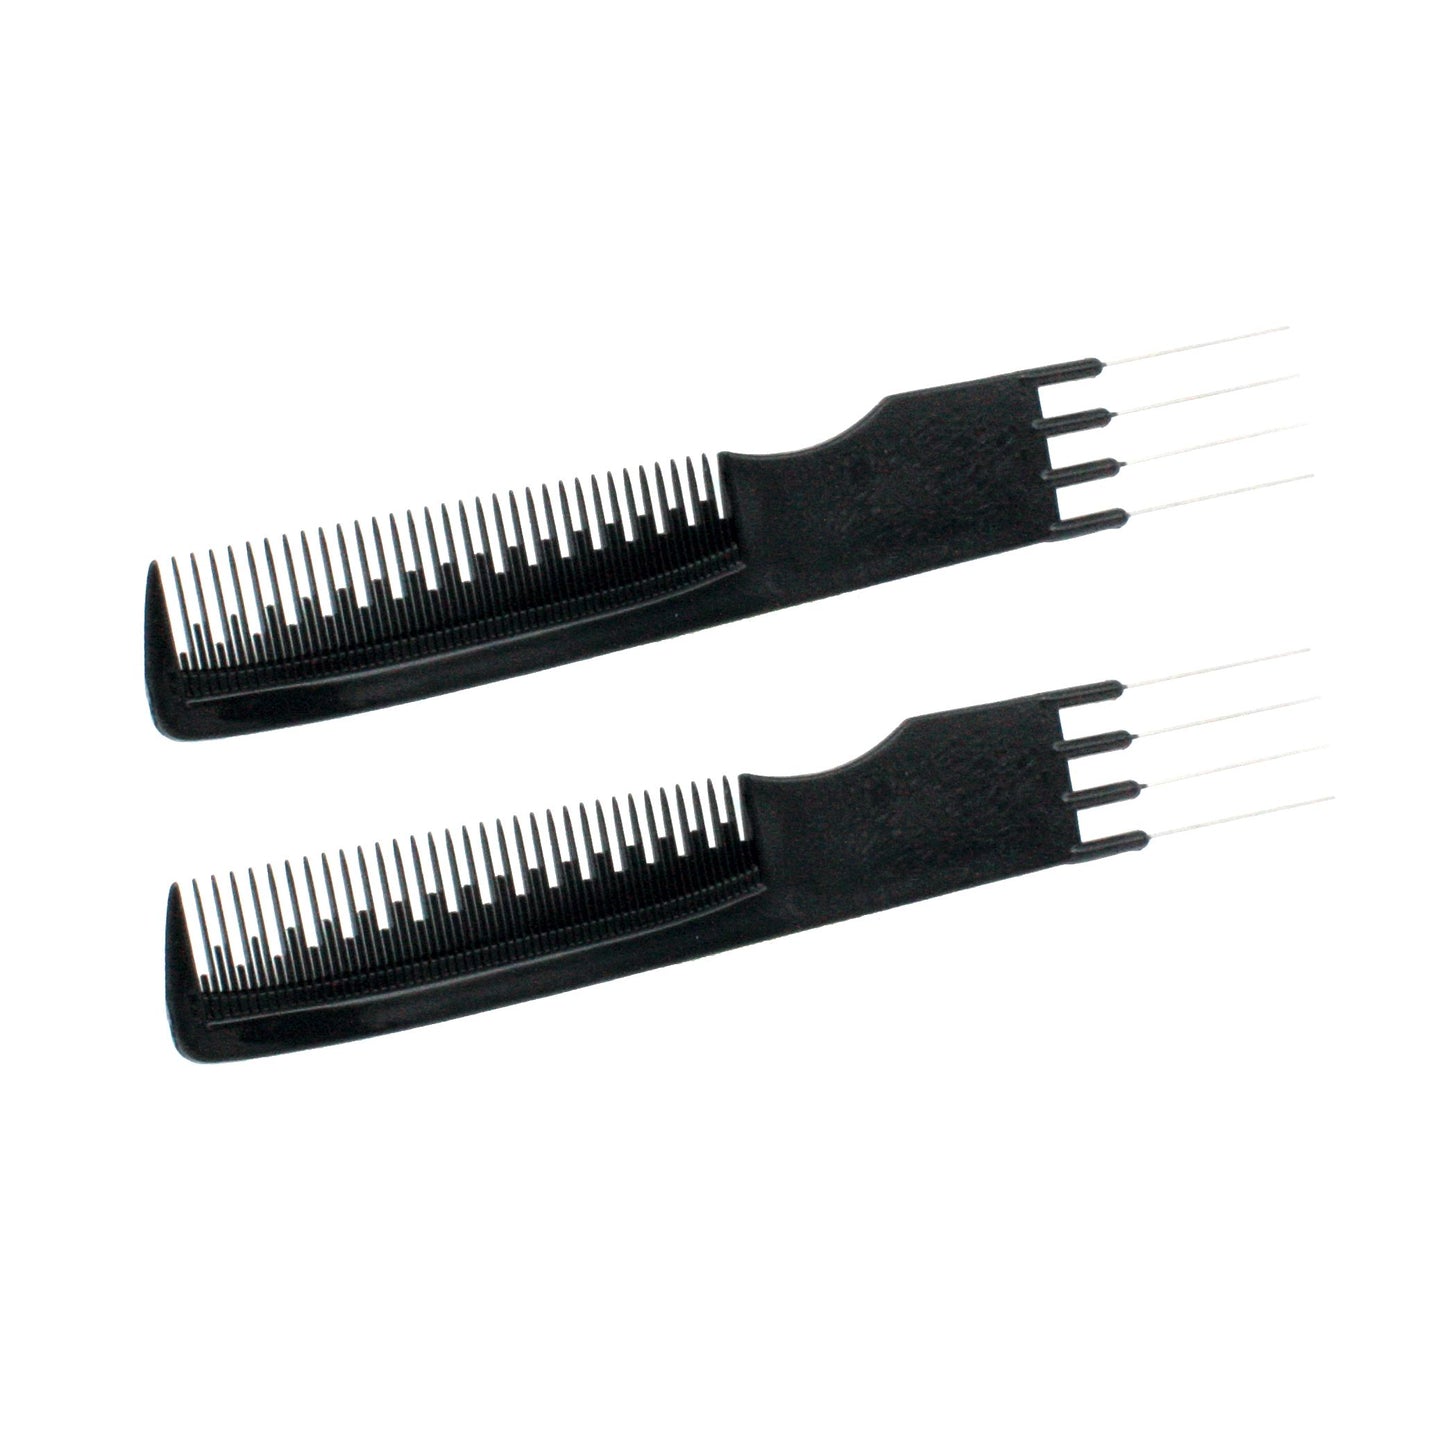 7.75 Plastic Stainless Lift Tease Comb (2 Pack)